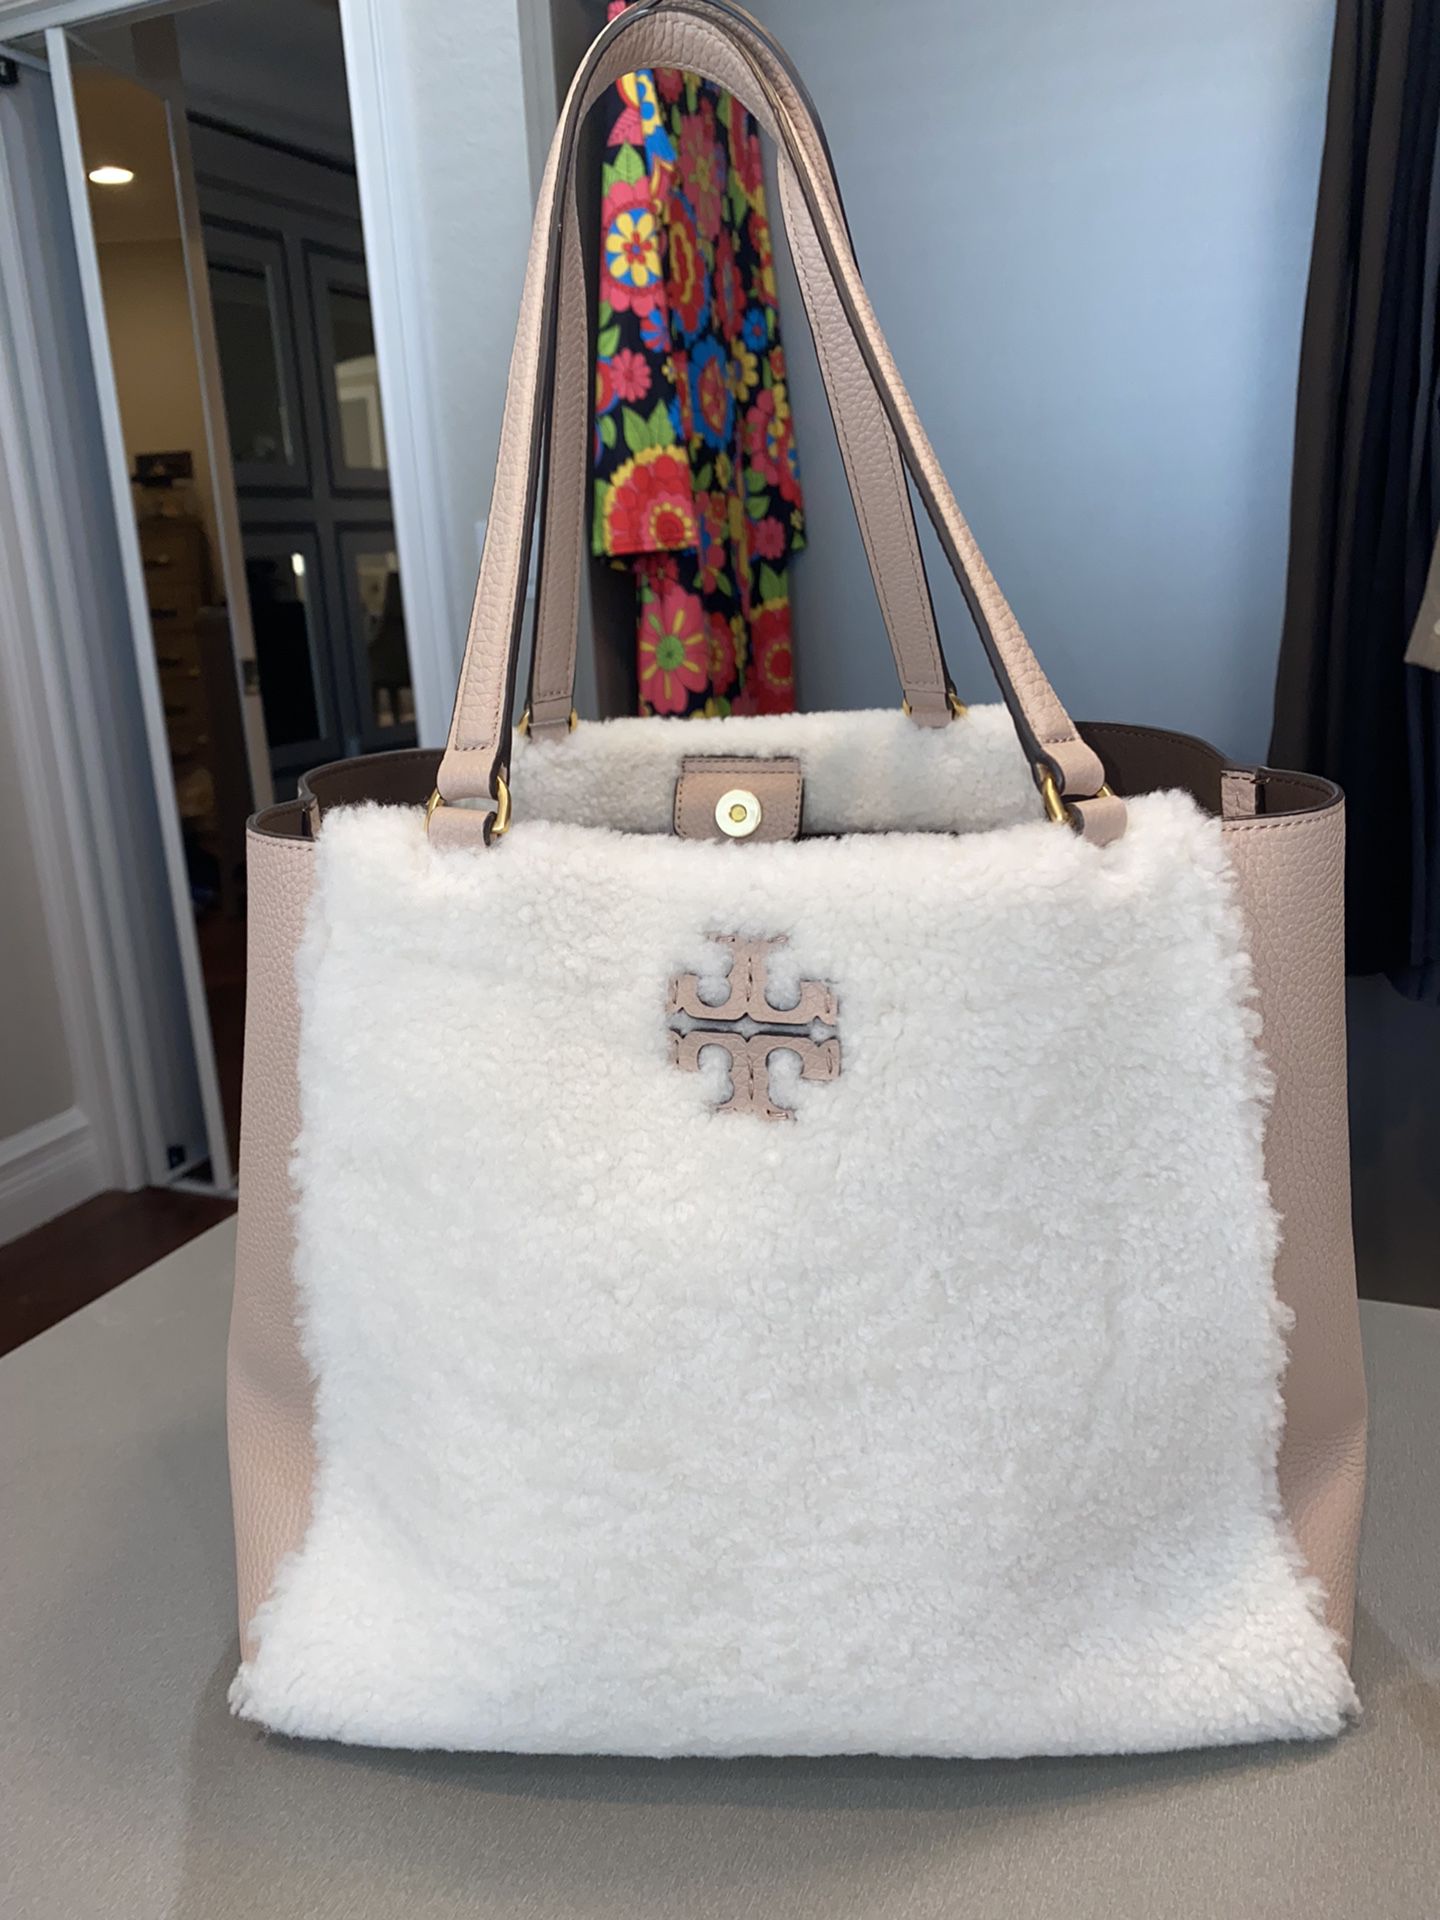 Tory Burch Tote Bag for Sale in West Palm Beach, FL - OfferUp